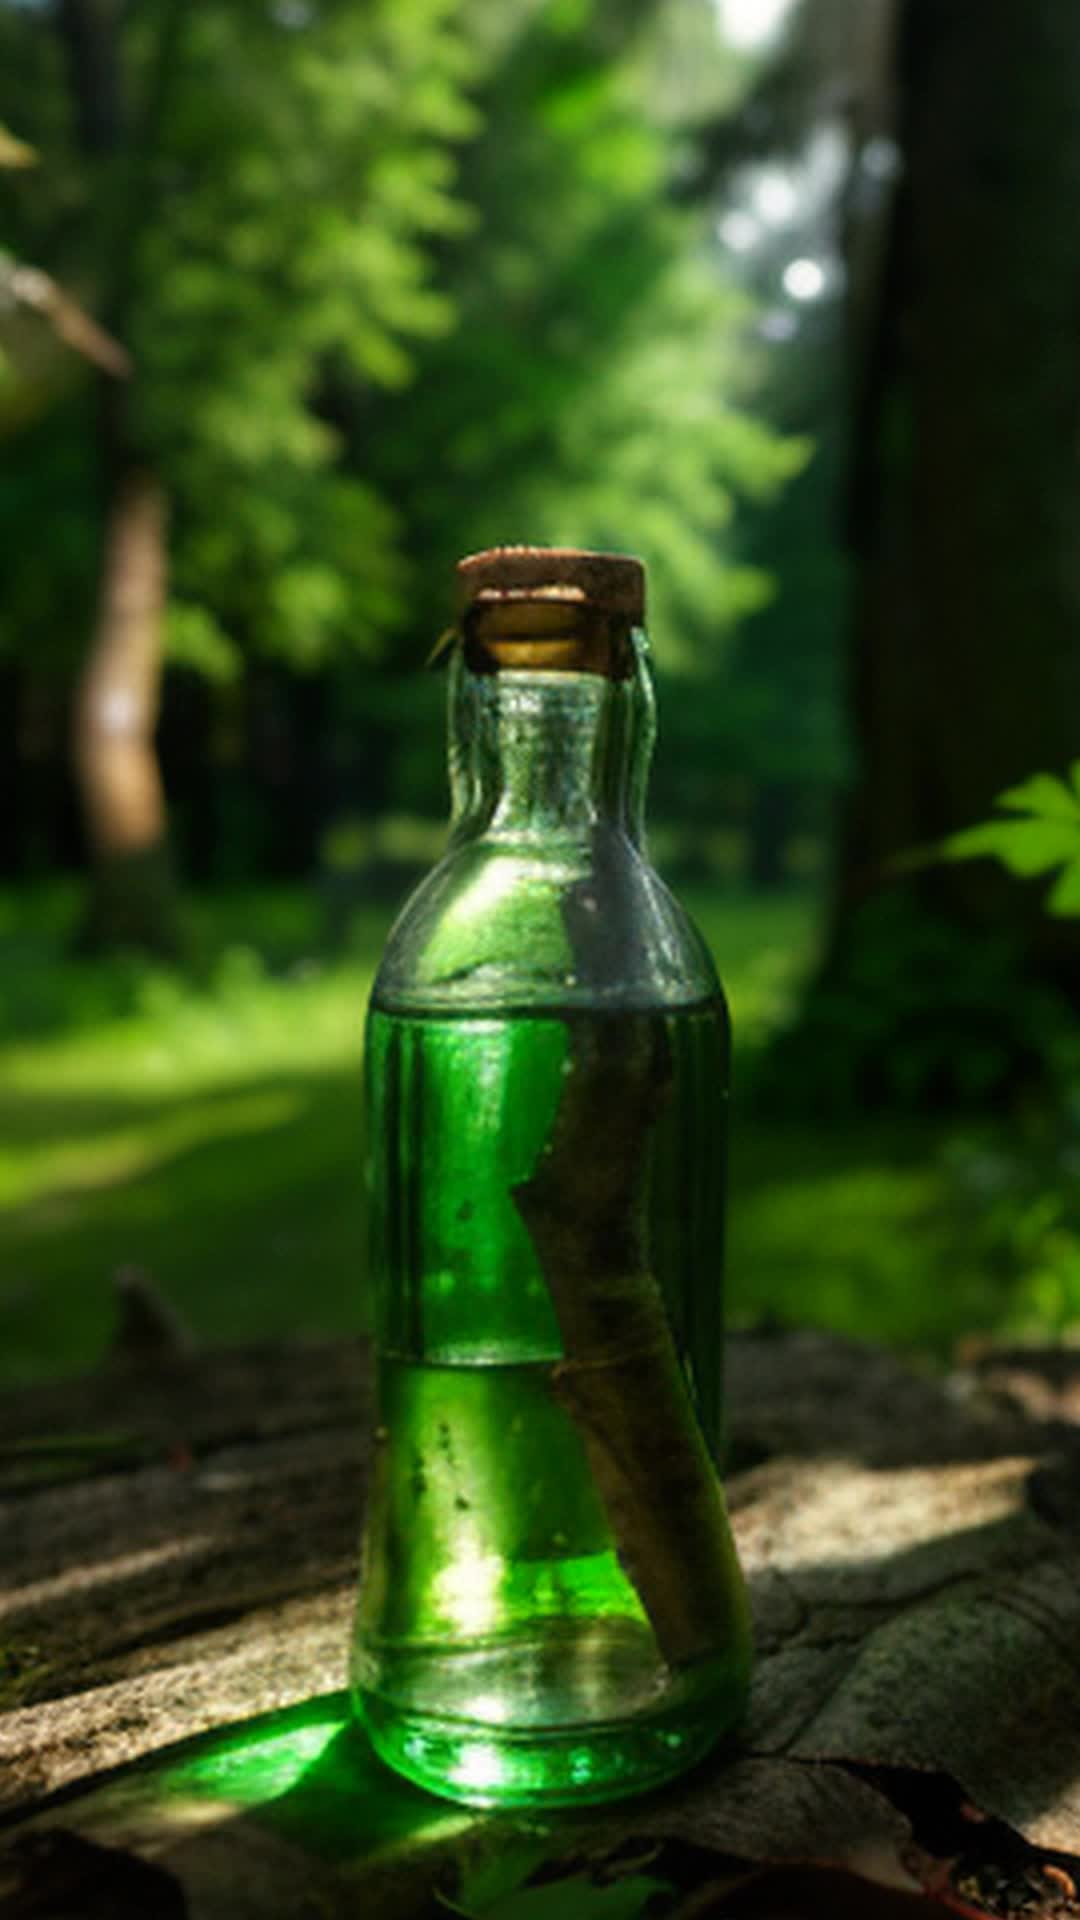 paper glass, bottle of vodka, herring on newspaper, pickled cucumber, rustic tree stump, outdoor setting, lush green forest background, sunlight filtering through leaves, soft shadows, highly detailed, sharp focus, natural colors, closeup shot, cinematic feel, light breeze rustling leaves, gentle ambient sounds of forest, realistic texture details, vibrant greenery, warm glow, subtle camera movement, atmospheric depth, serene nature ambiance